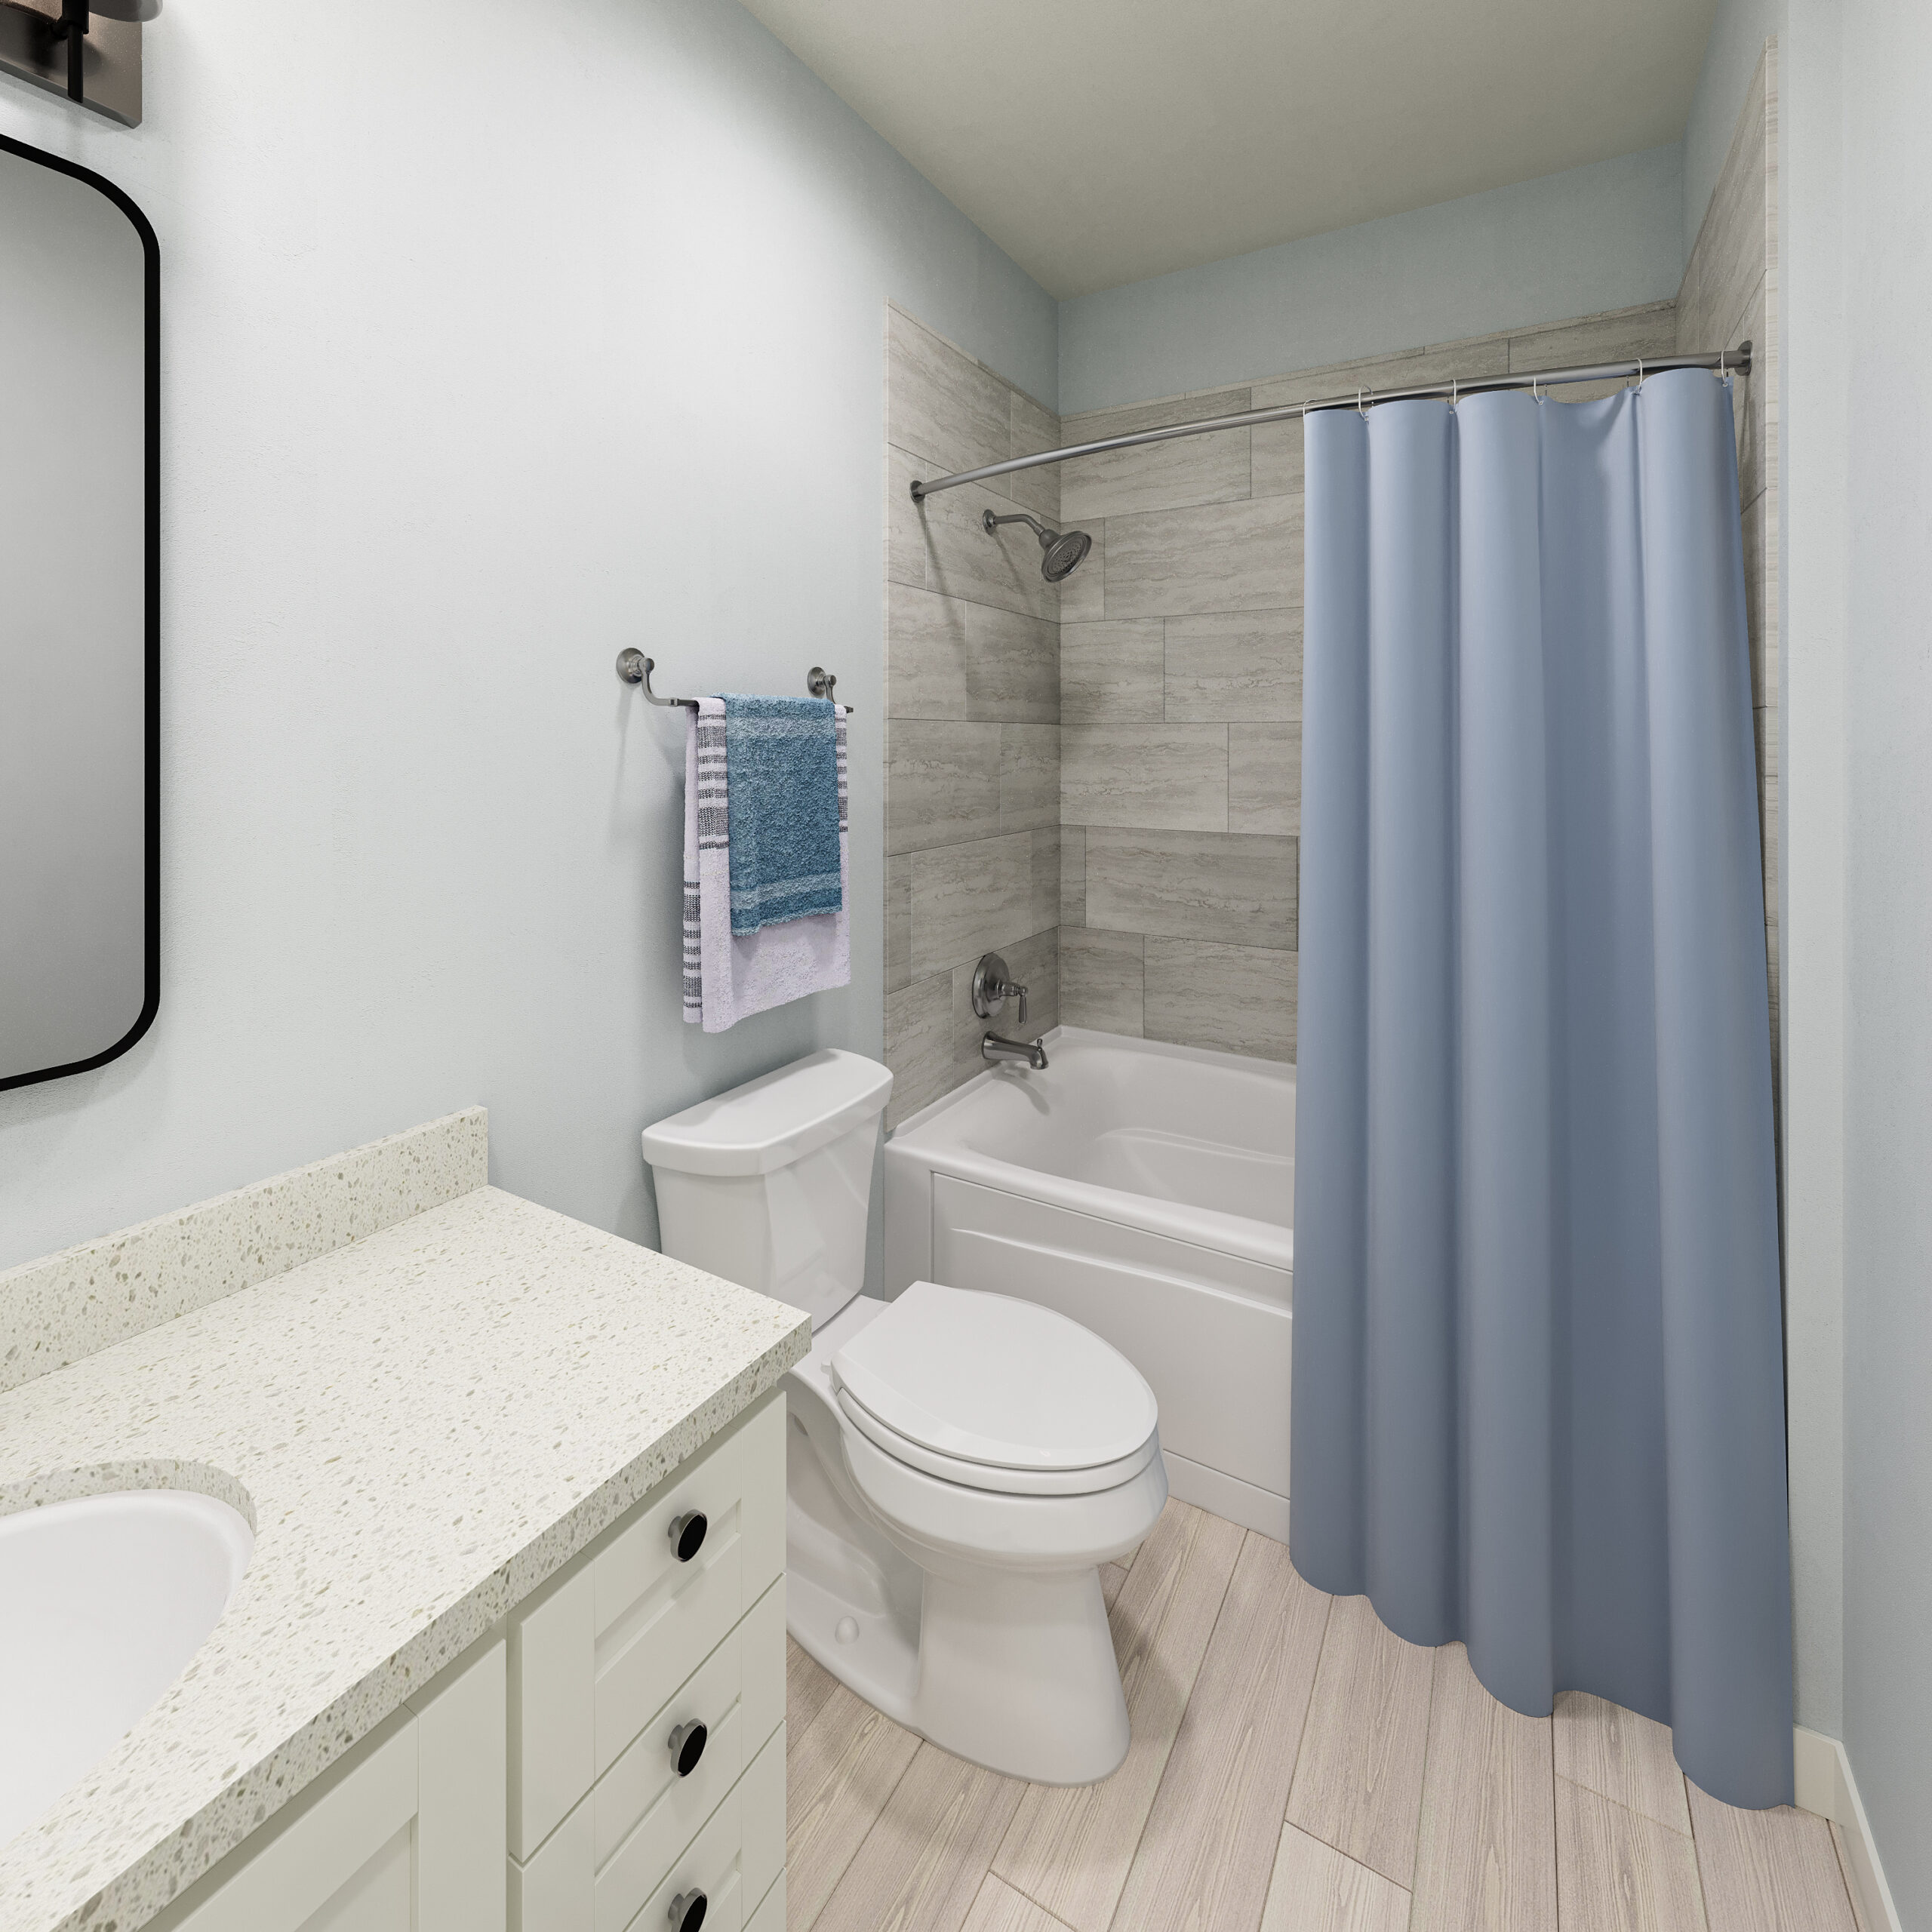 Luxury apartment bathroom with sink and vanity, storage cabinets below the countertop, and a bath/shower with curtain.